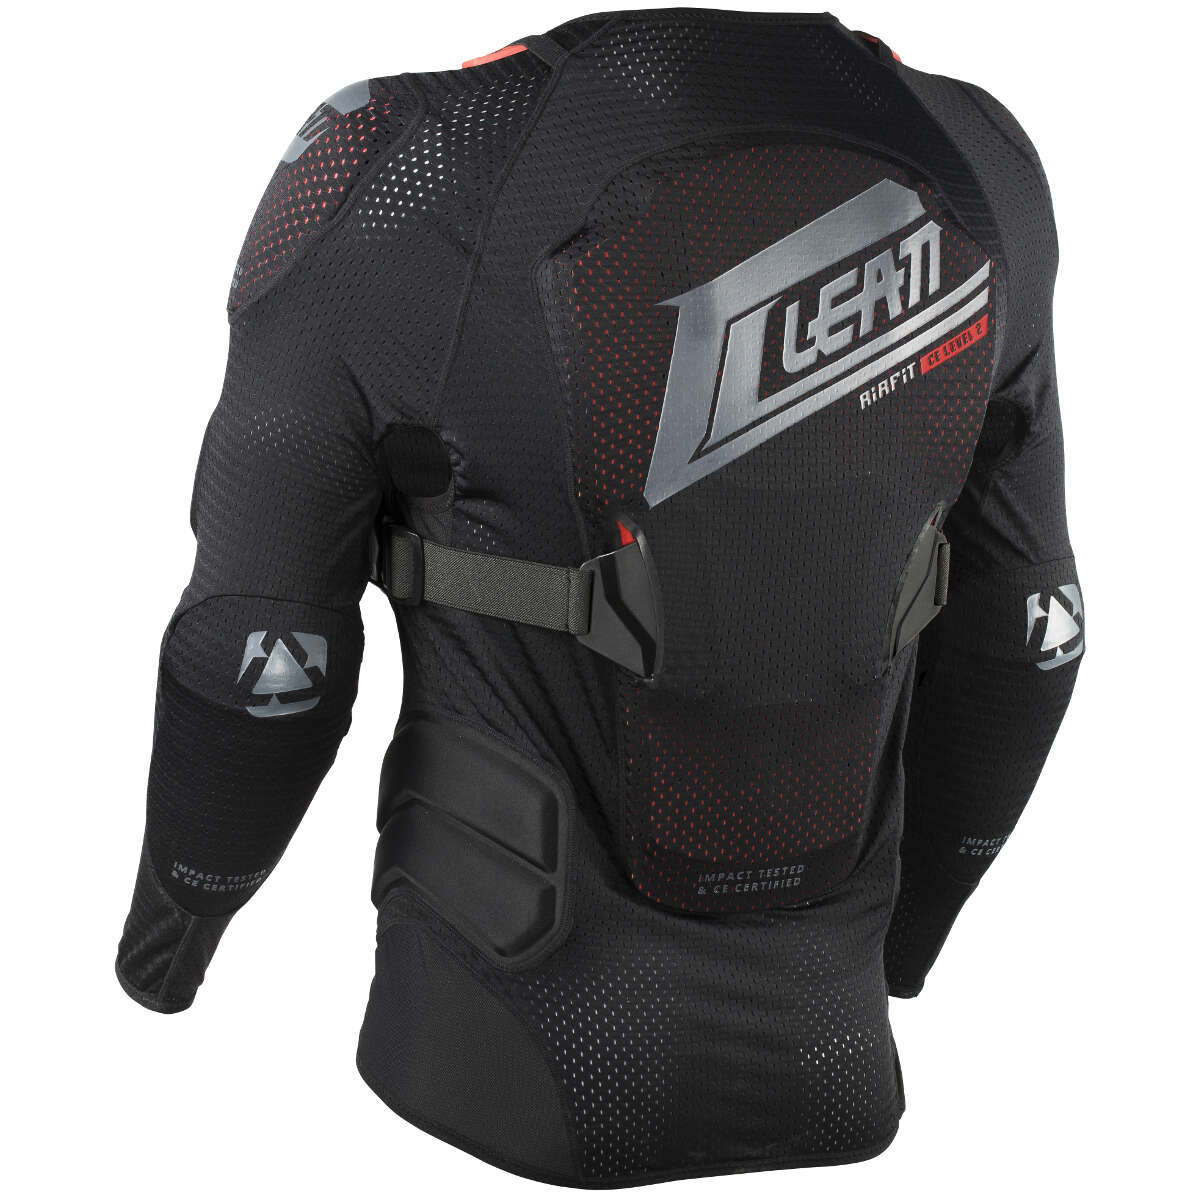 Leatt Unisex Women 3DF AirFit Motorcycle Bust Protective Vest with Perforated Mesh Men 